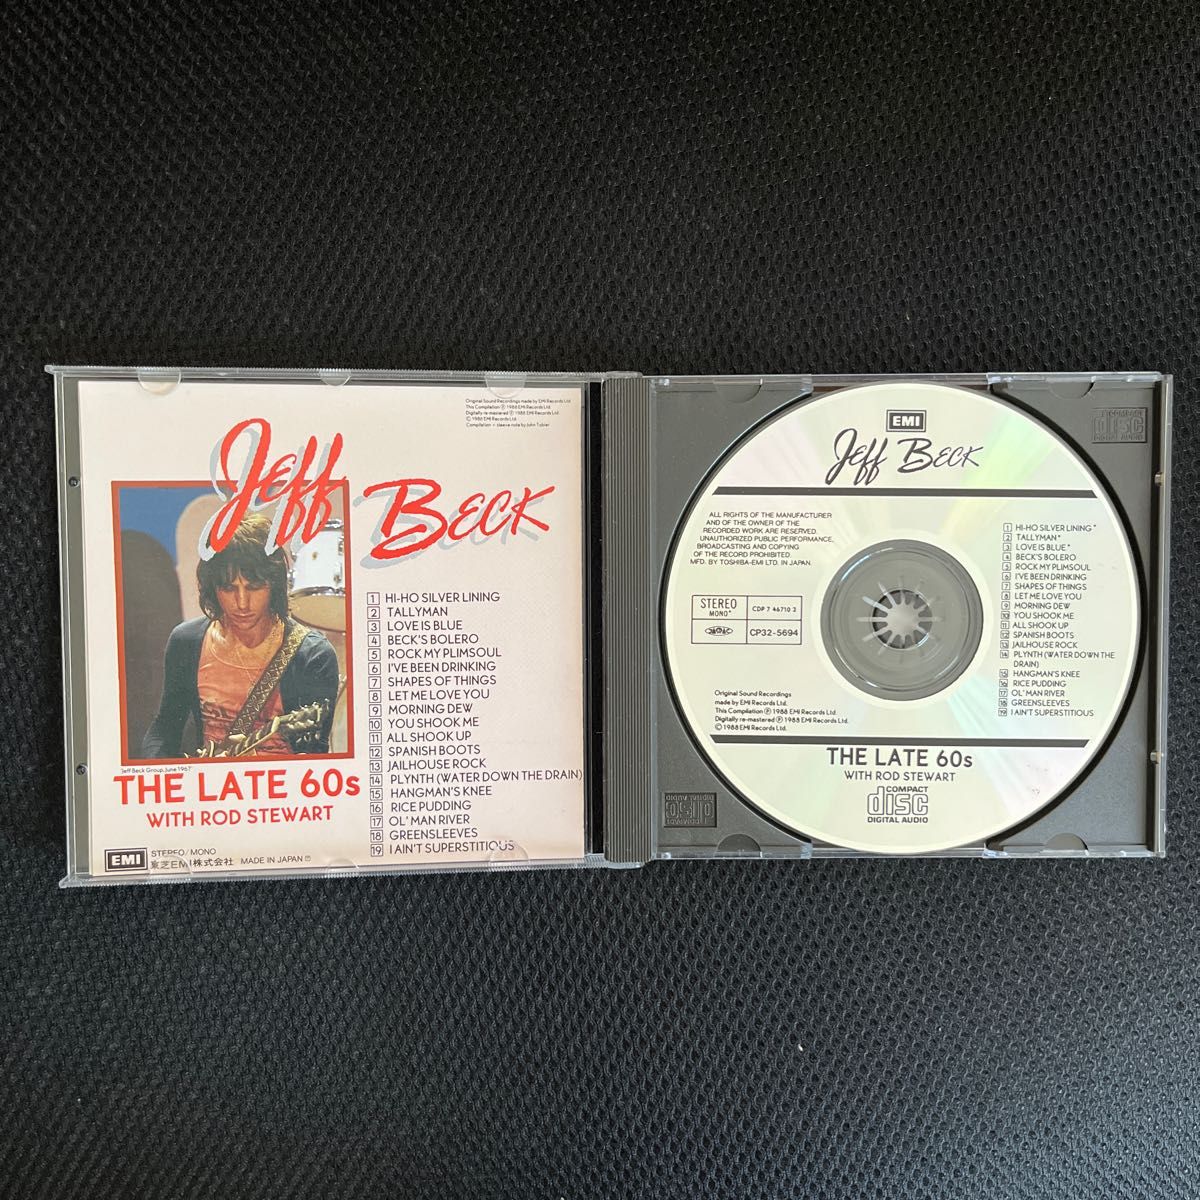 Jeff beck THE LATE 60s CD (guitar  legend  CD)